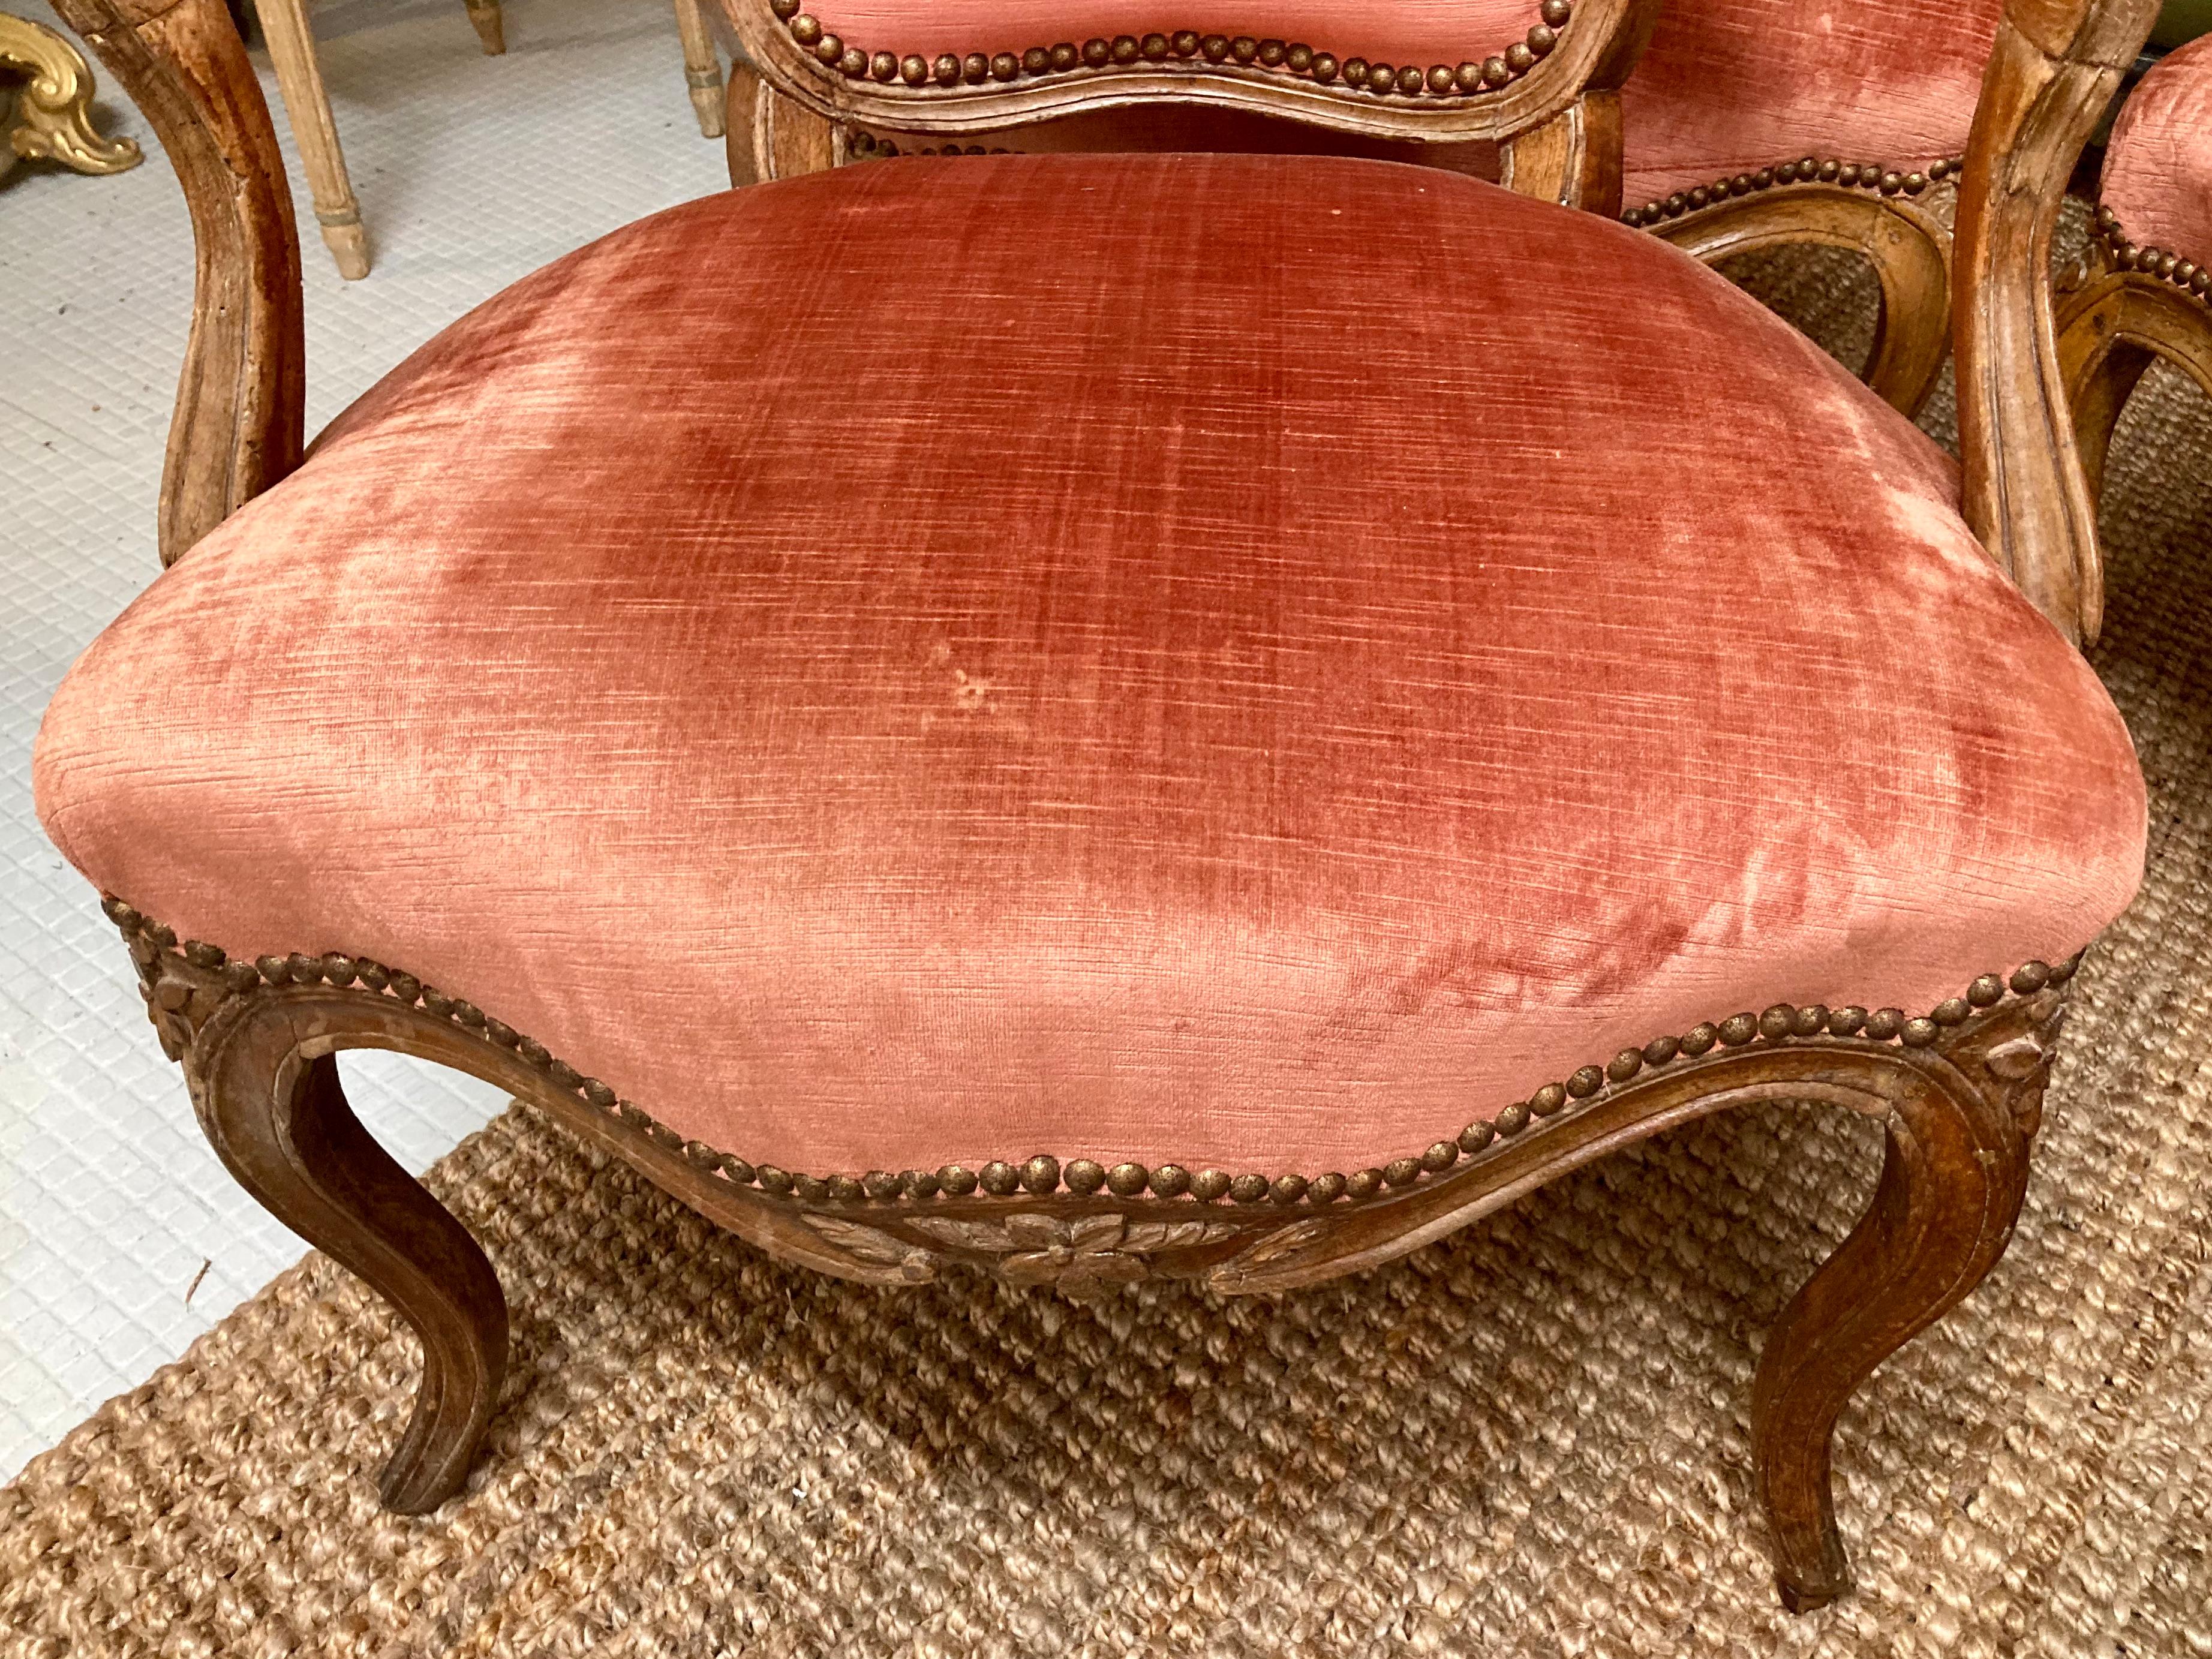 18th C French Louis XV Fauteuil Chairs Each With Unique Carvings - Set of 4 For Sale 6